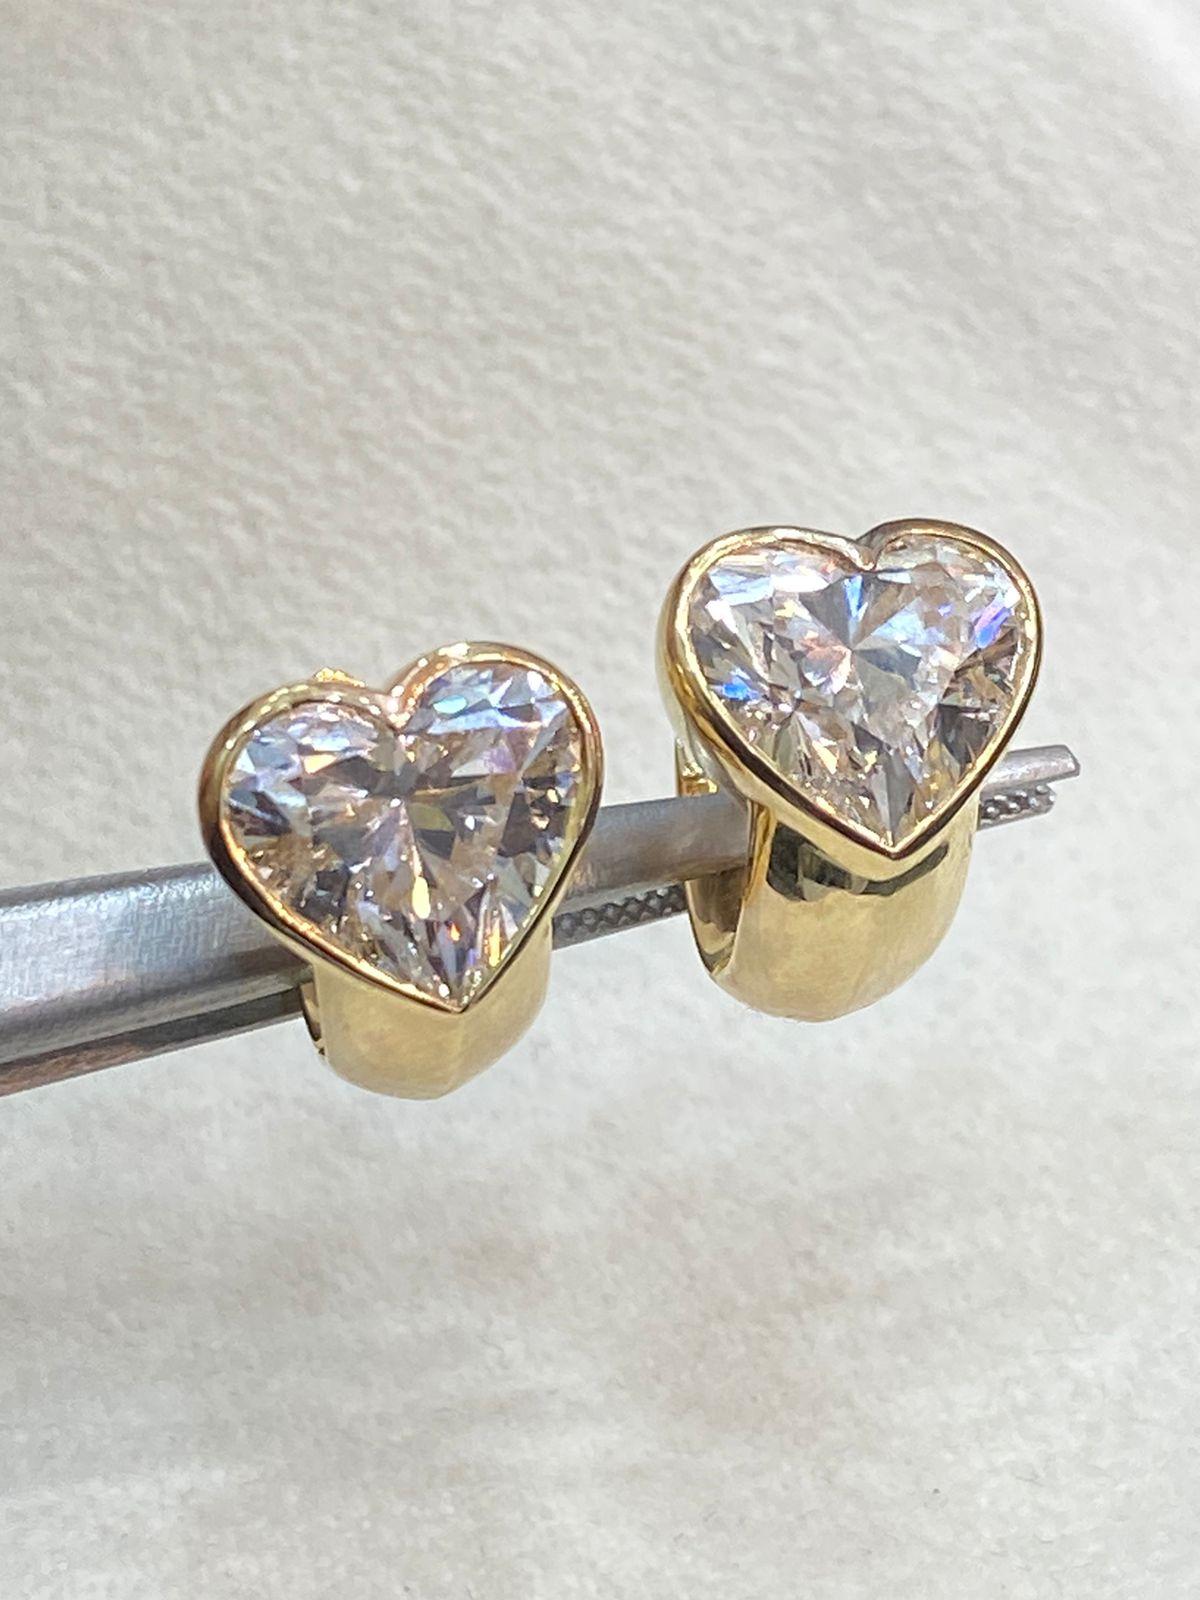 Obsessed with heart cut diamonds, are so special, romantic shape. Indulge in the exquisite Diamonds , showcasing unparalleled craftsmanship and the rarest gems on earth.
Treat yourself to these exceptional earrings, each reflecting the beauty and